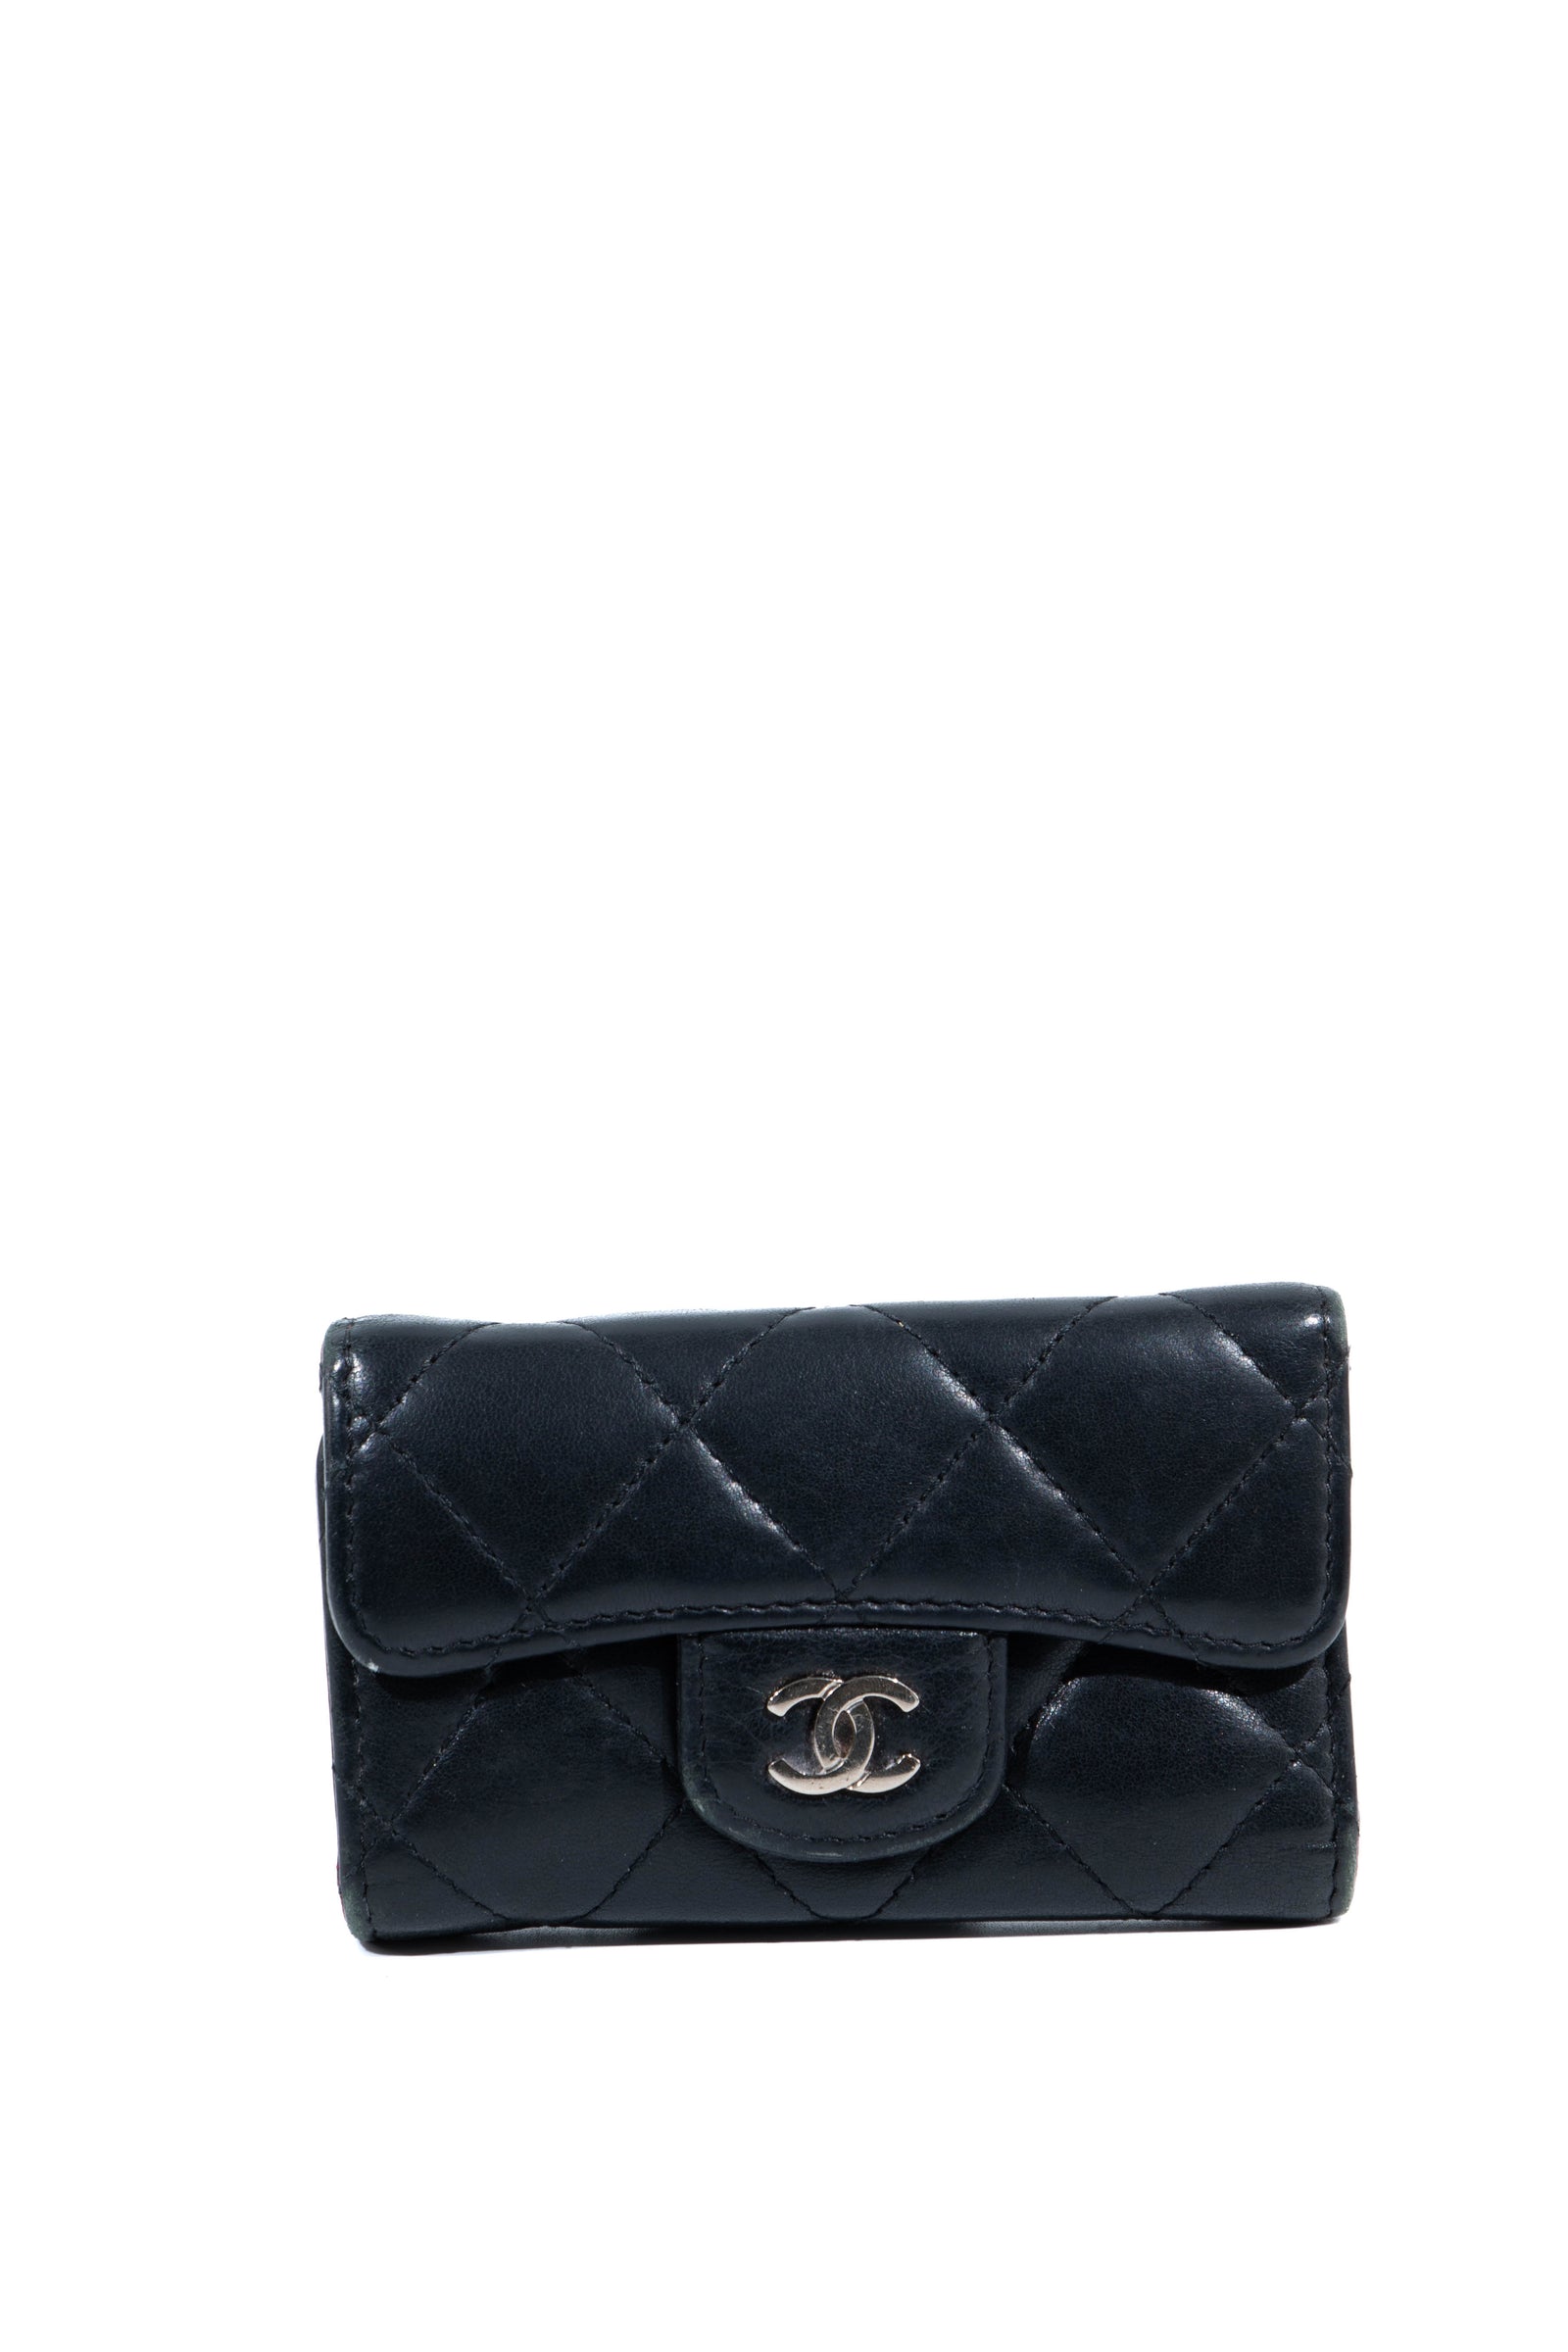 Ysl Zip Wallet, Shop The Largest Collection